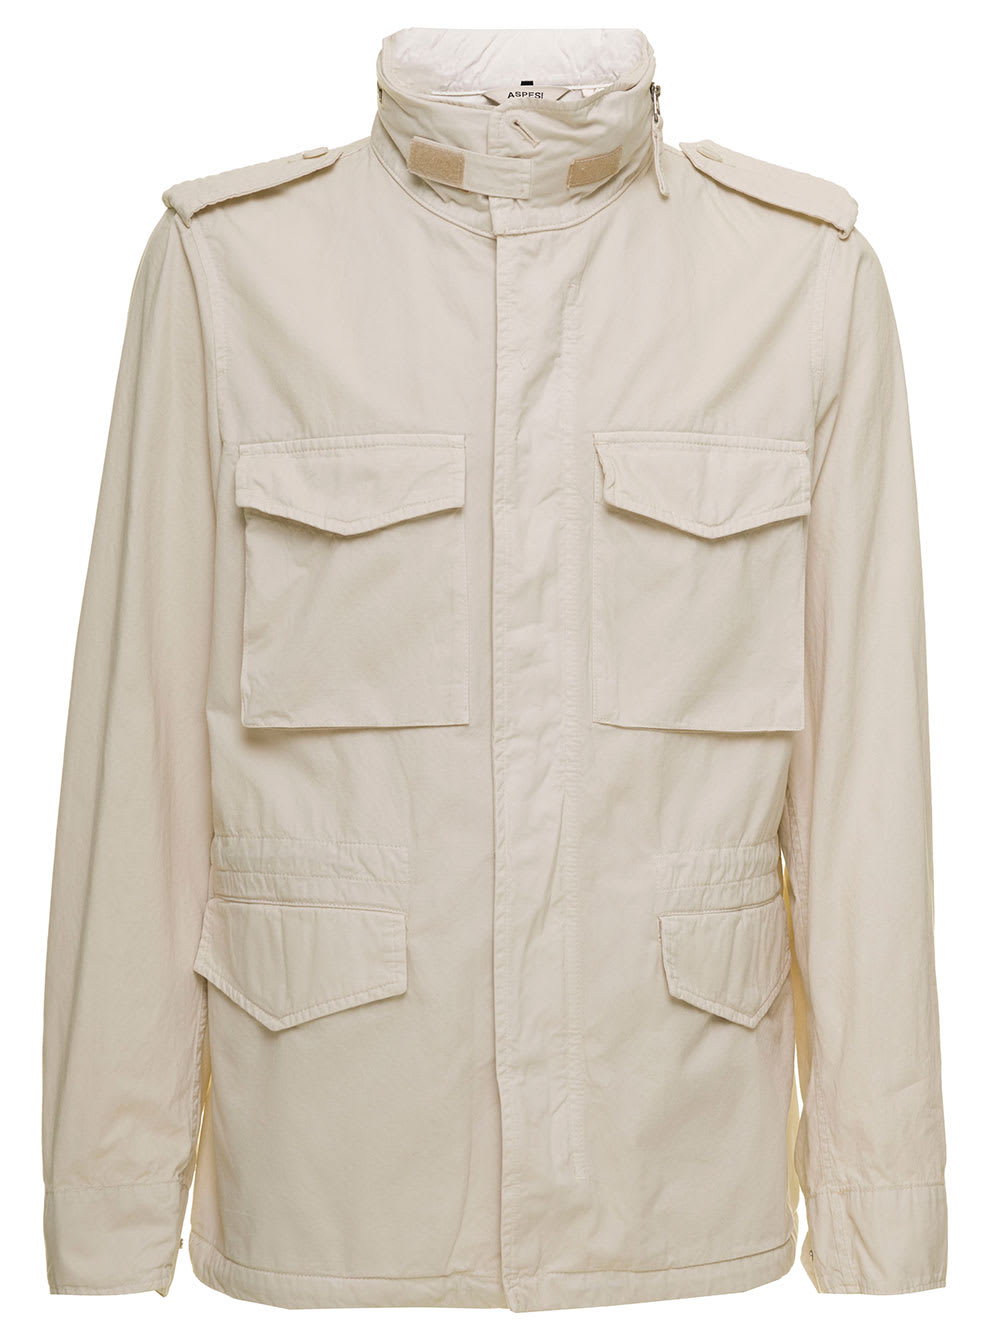 aspesi mens beige crumpled effect cotton jacket with pockets